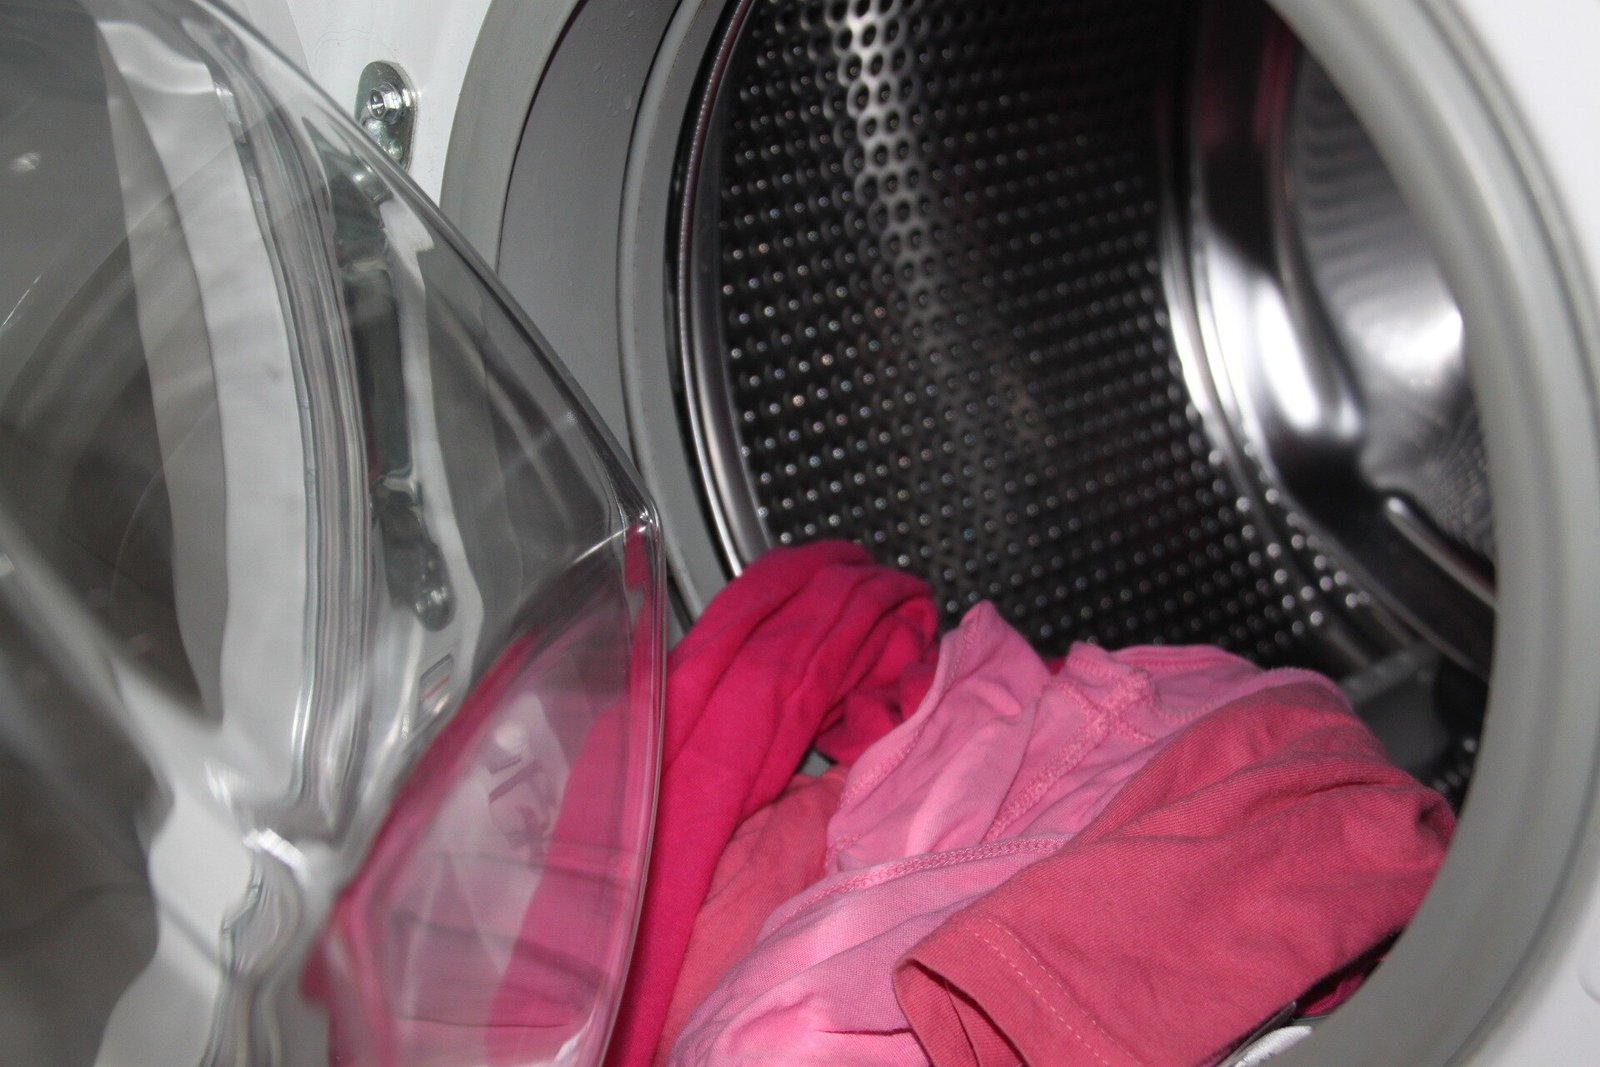 What washing machine settings can I use to make my clothes last longer?